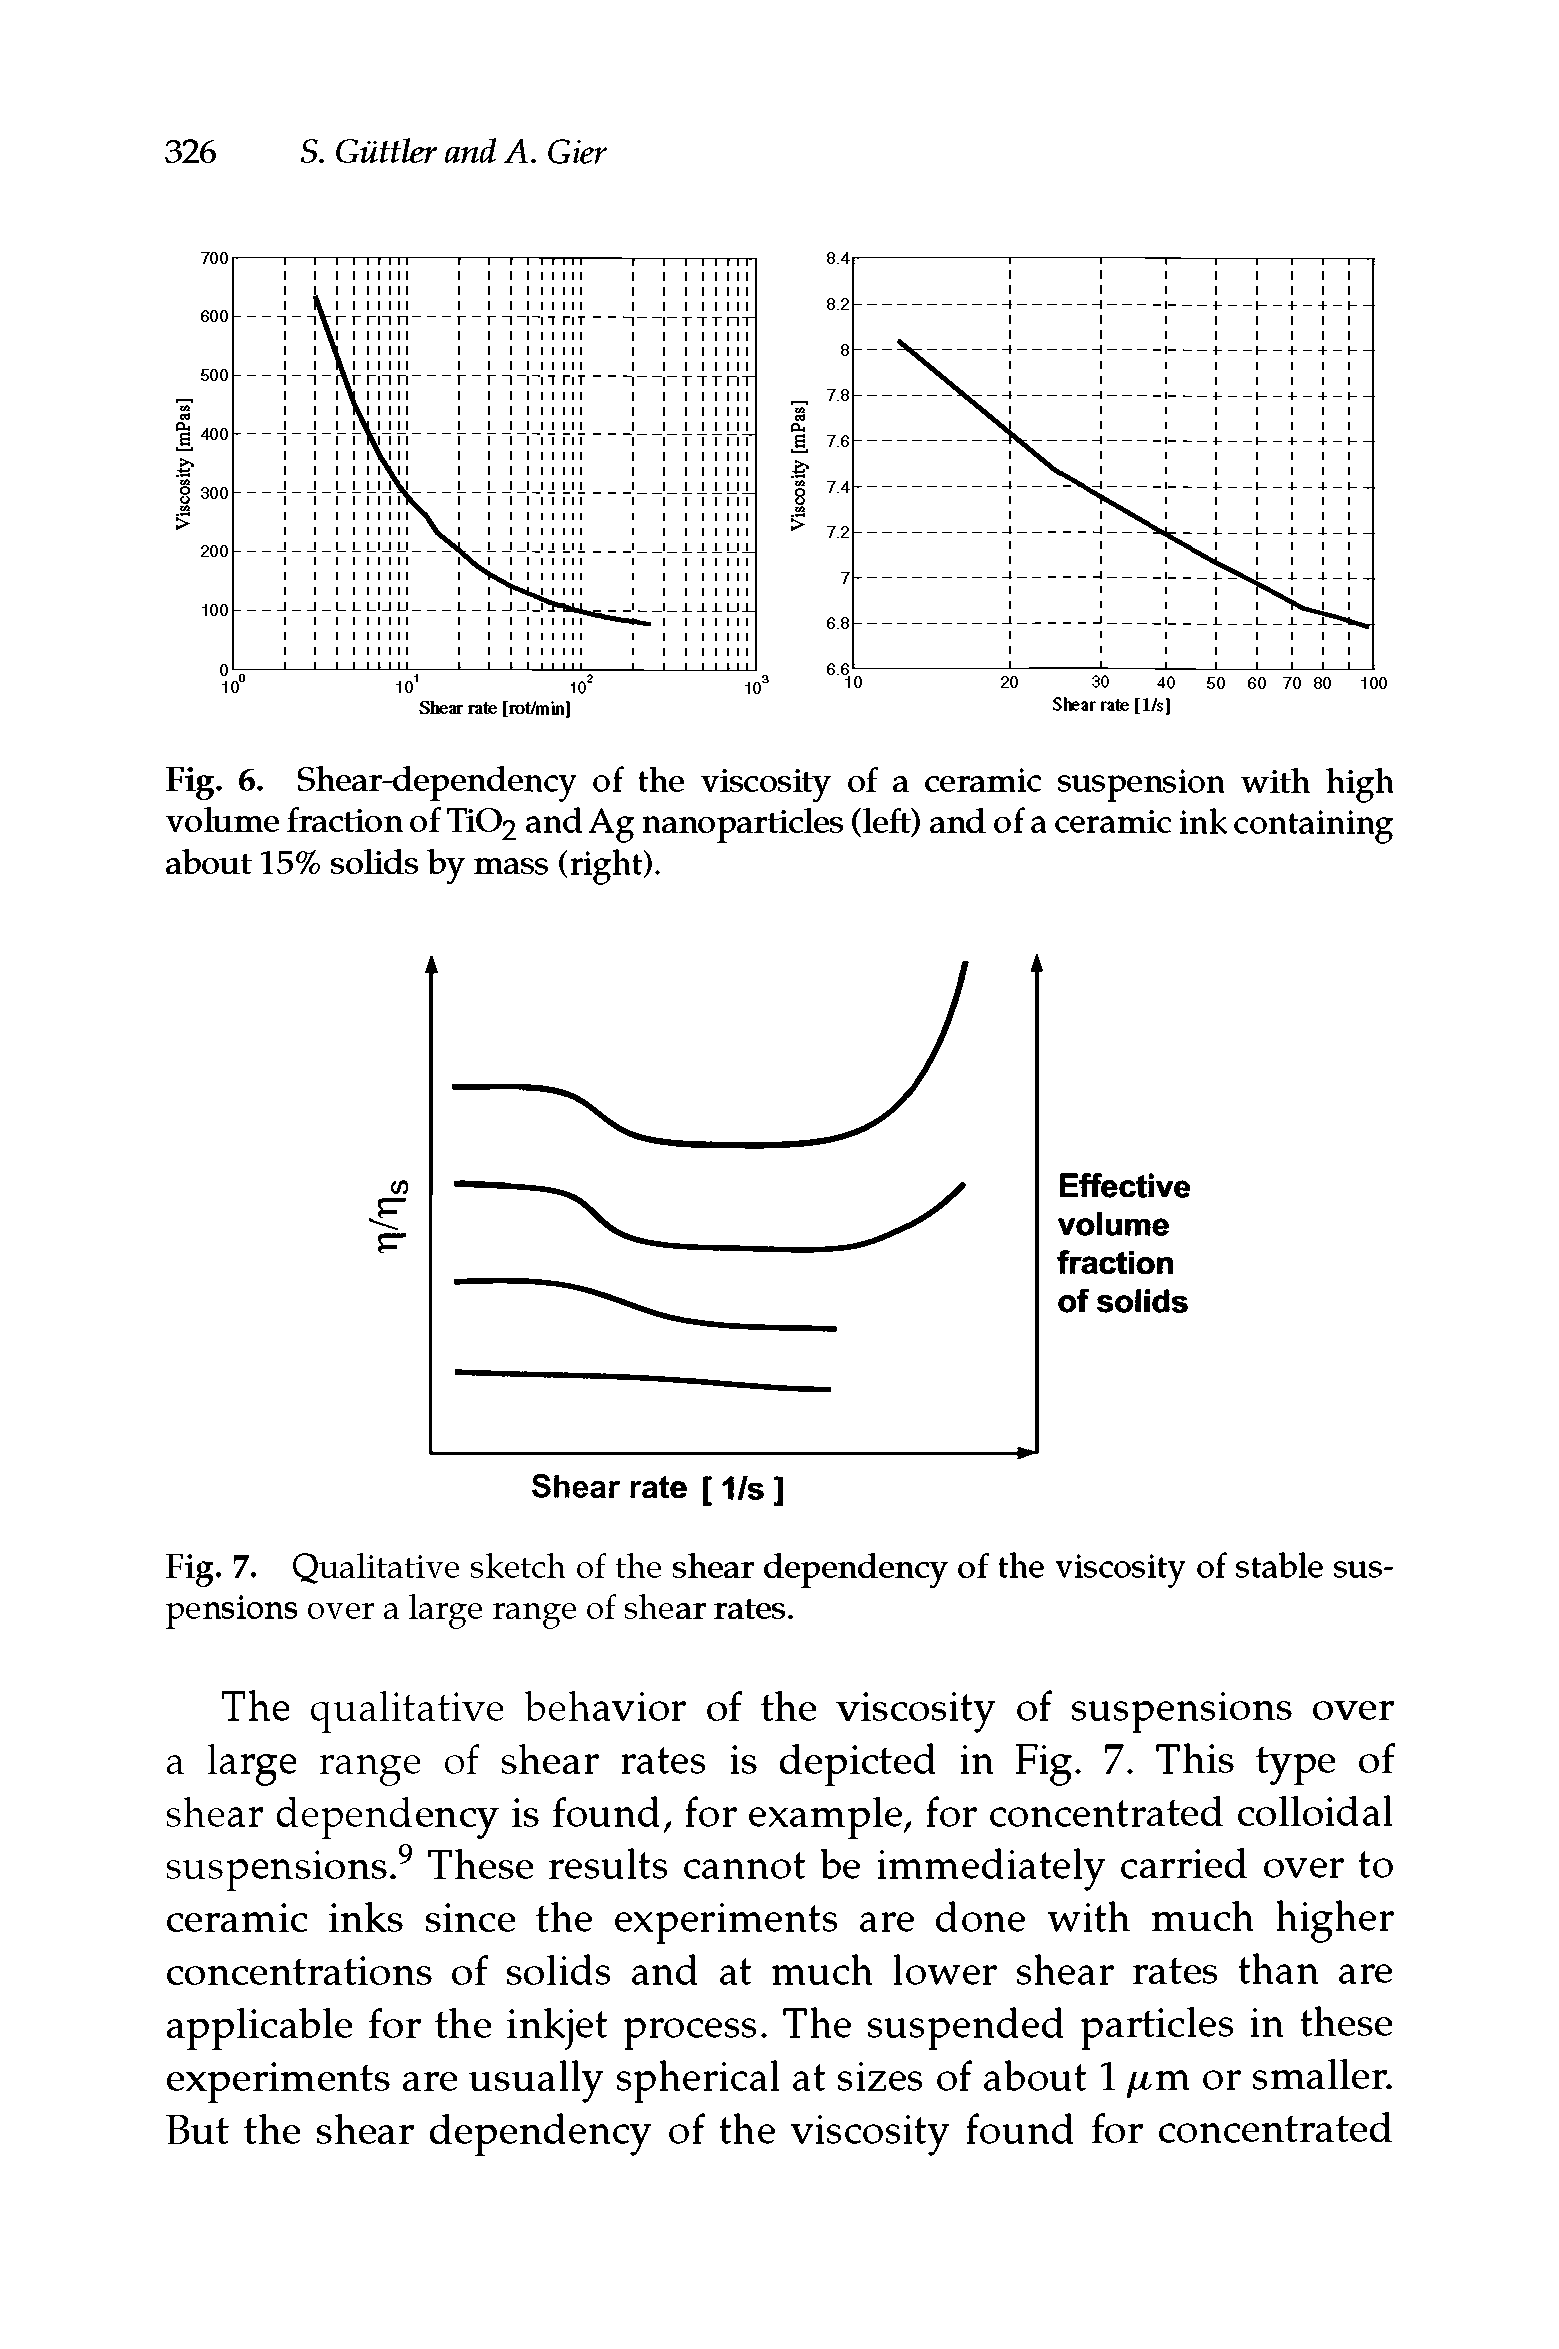 Fig. 7. Qualitative sketch of the shear dependency of the viscosity of stable suspensions over a large range of shear rates.